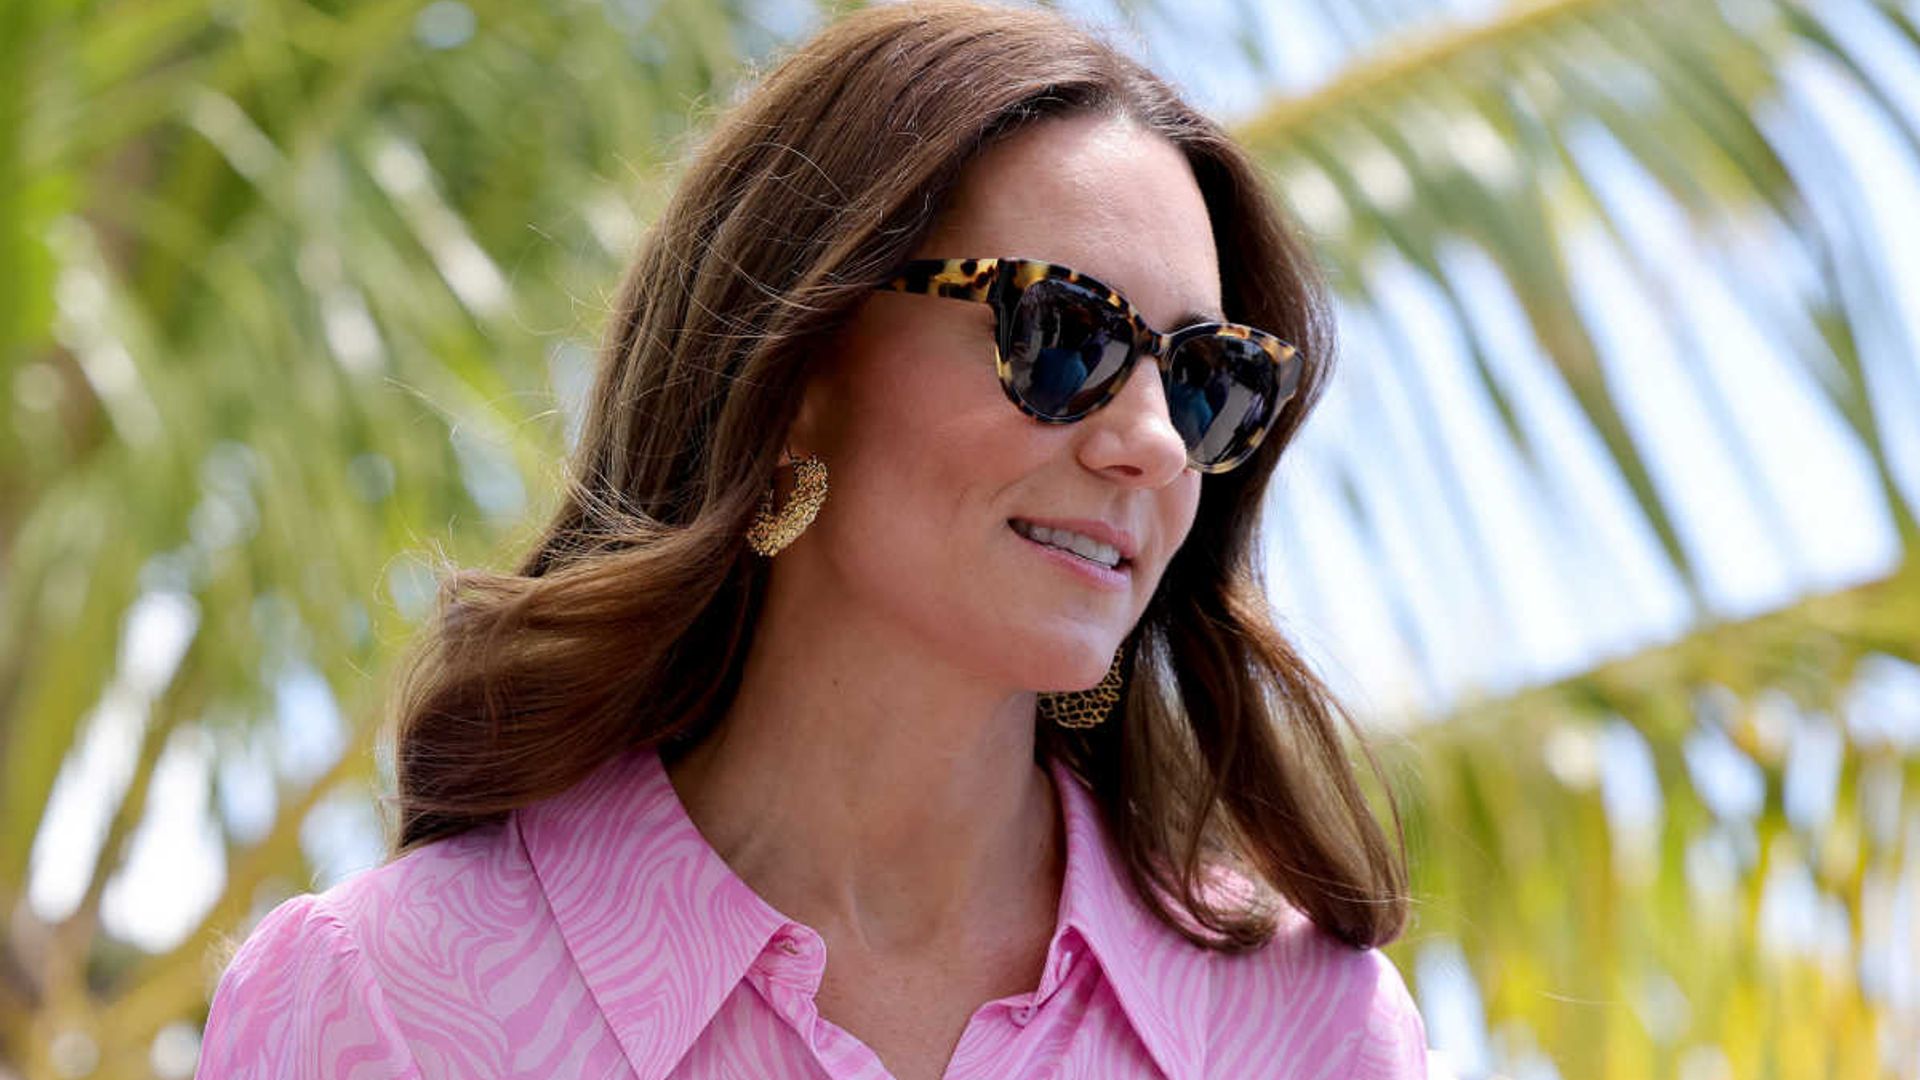 Kate Middleton's genius foldable travel bag is up to 60% off at Nordstrom Rack